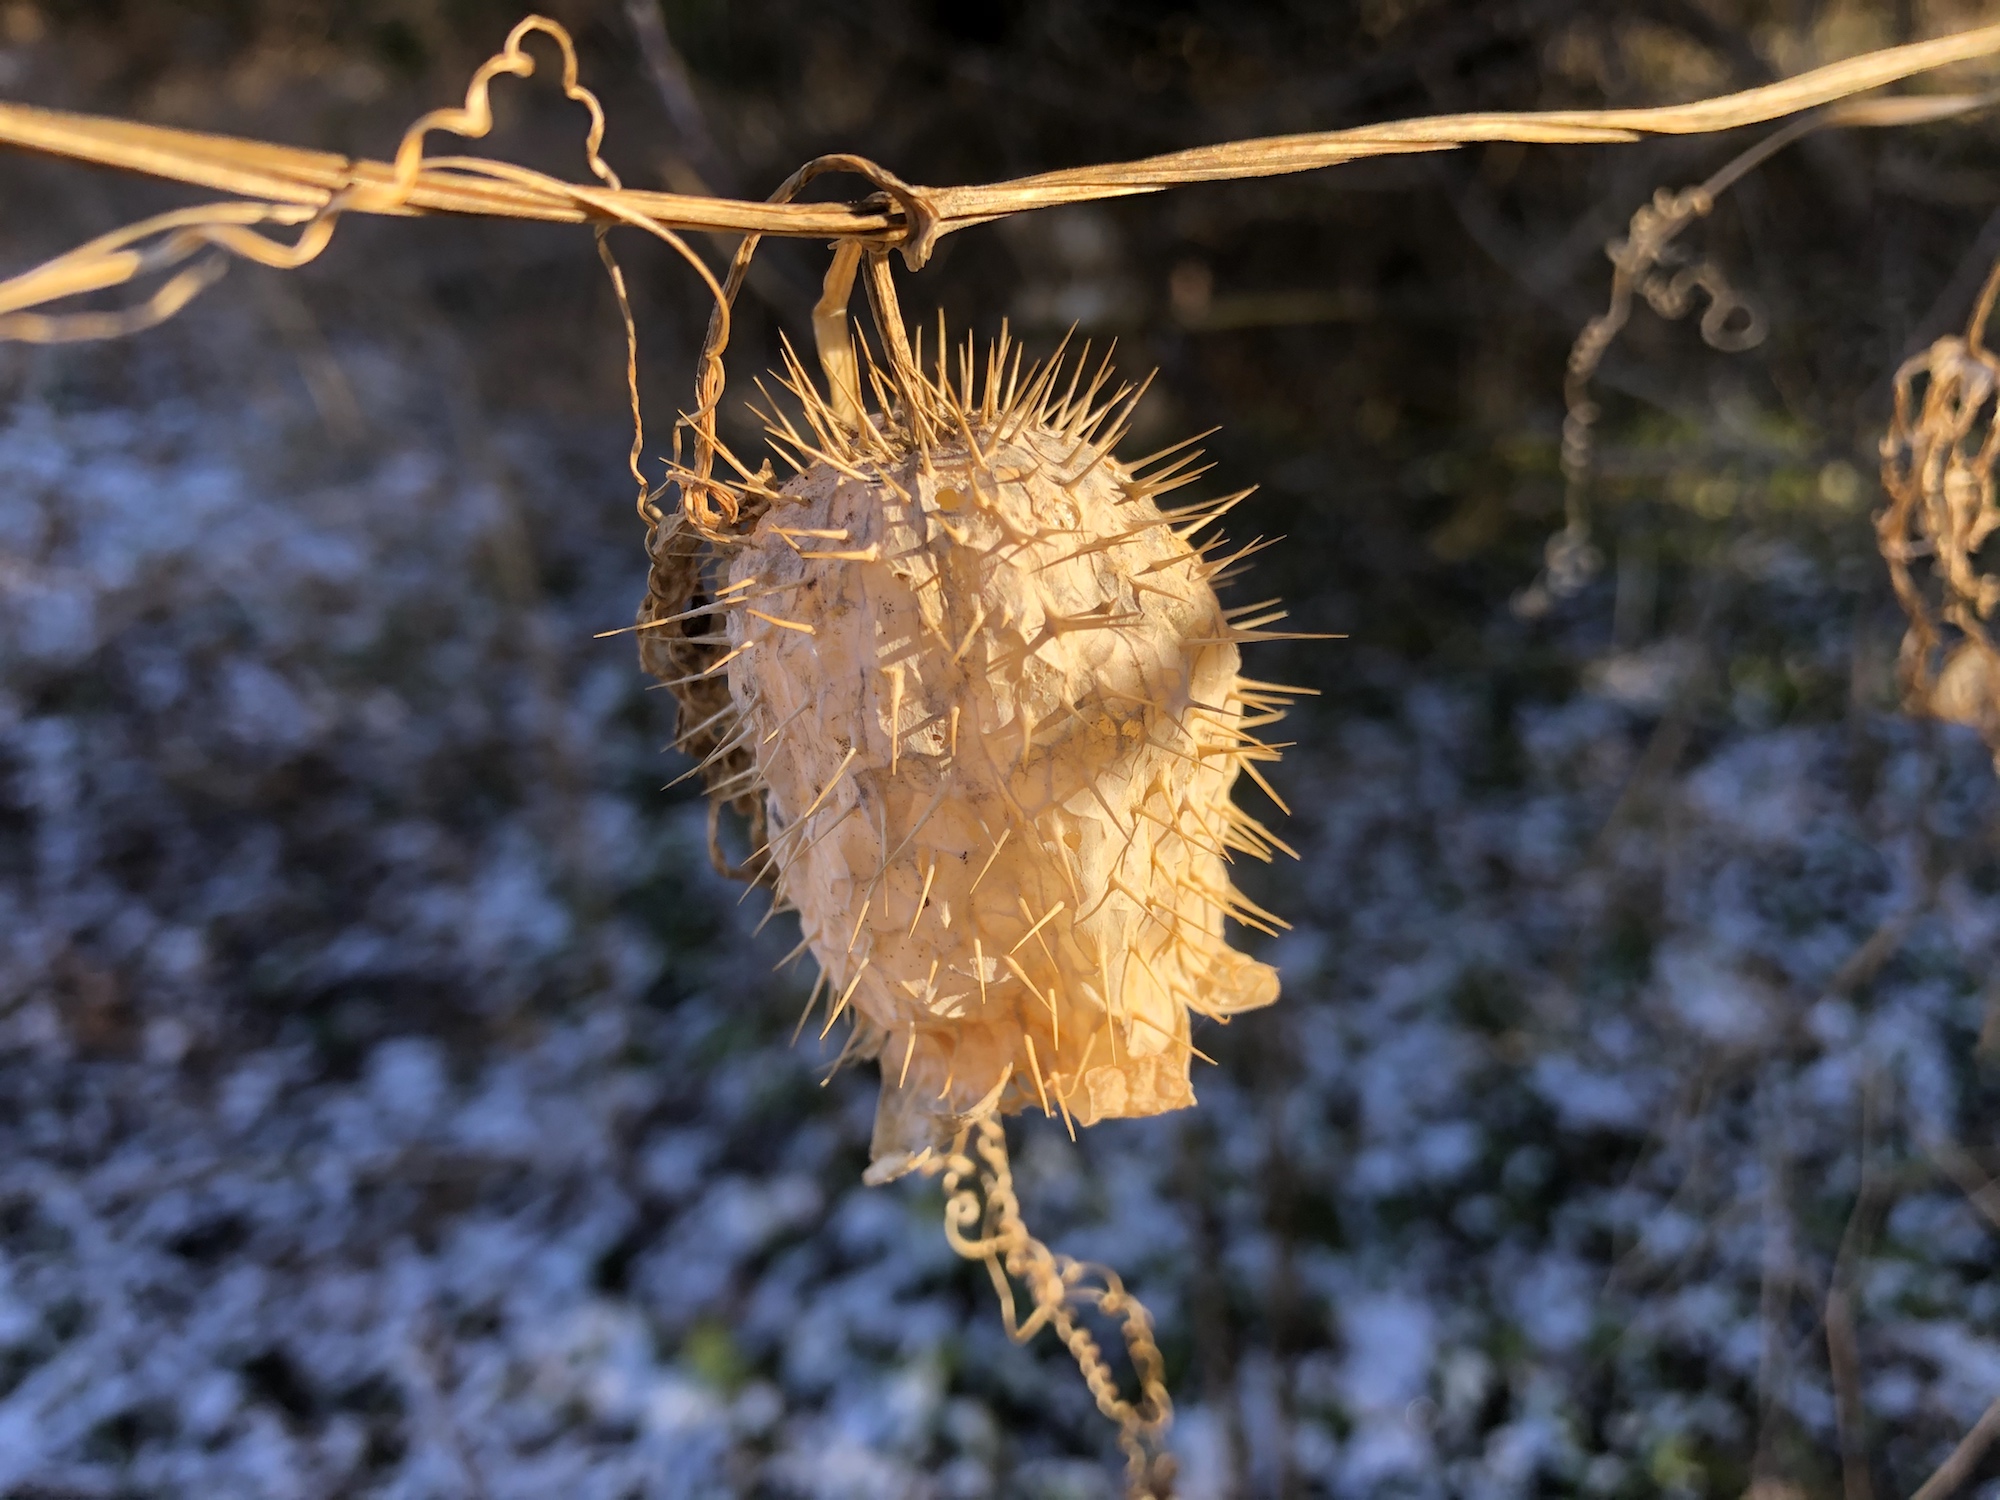 Wild Cucumber at edge of woods on Arbor Drive in Madison, Wisconsin on December 2, 2019.